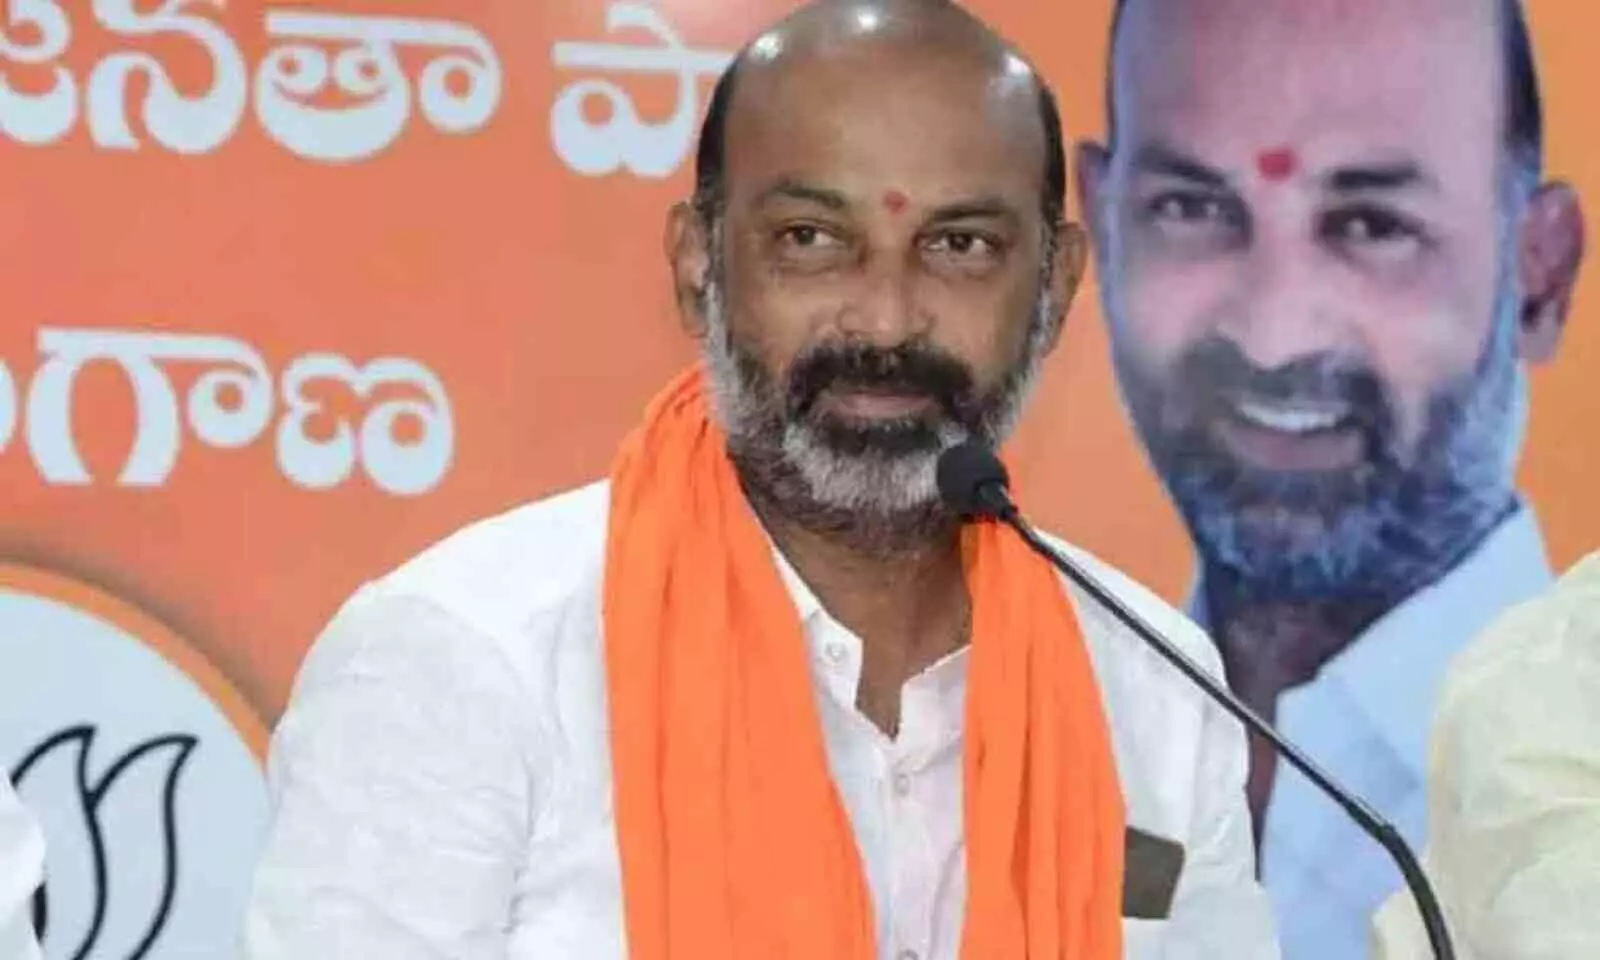 TRS and others file complaints about BJP leaders hate speech